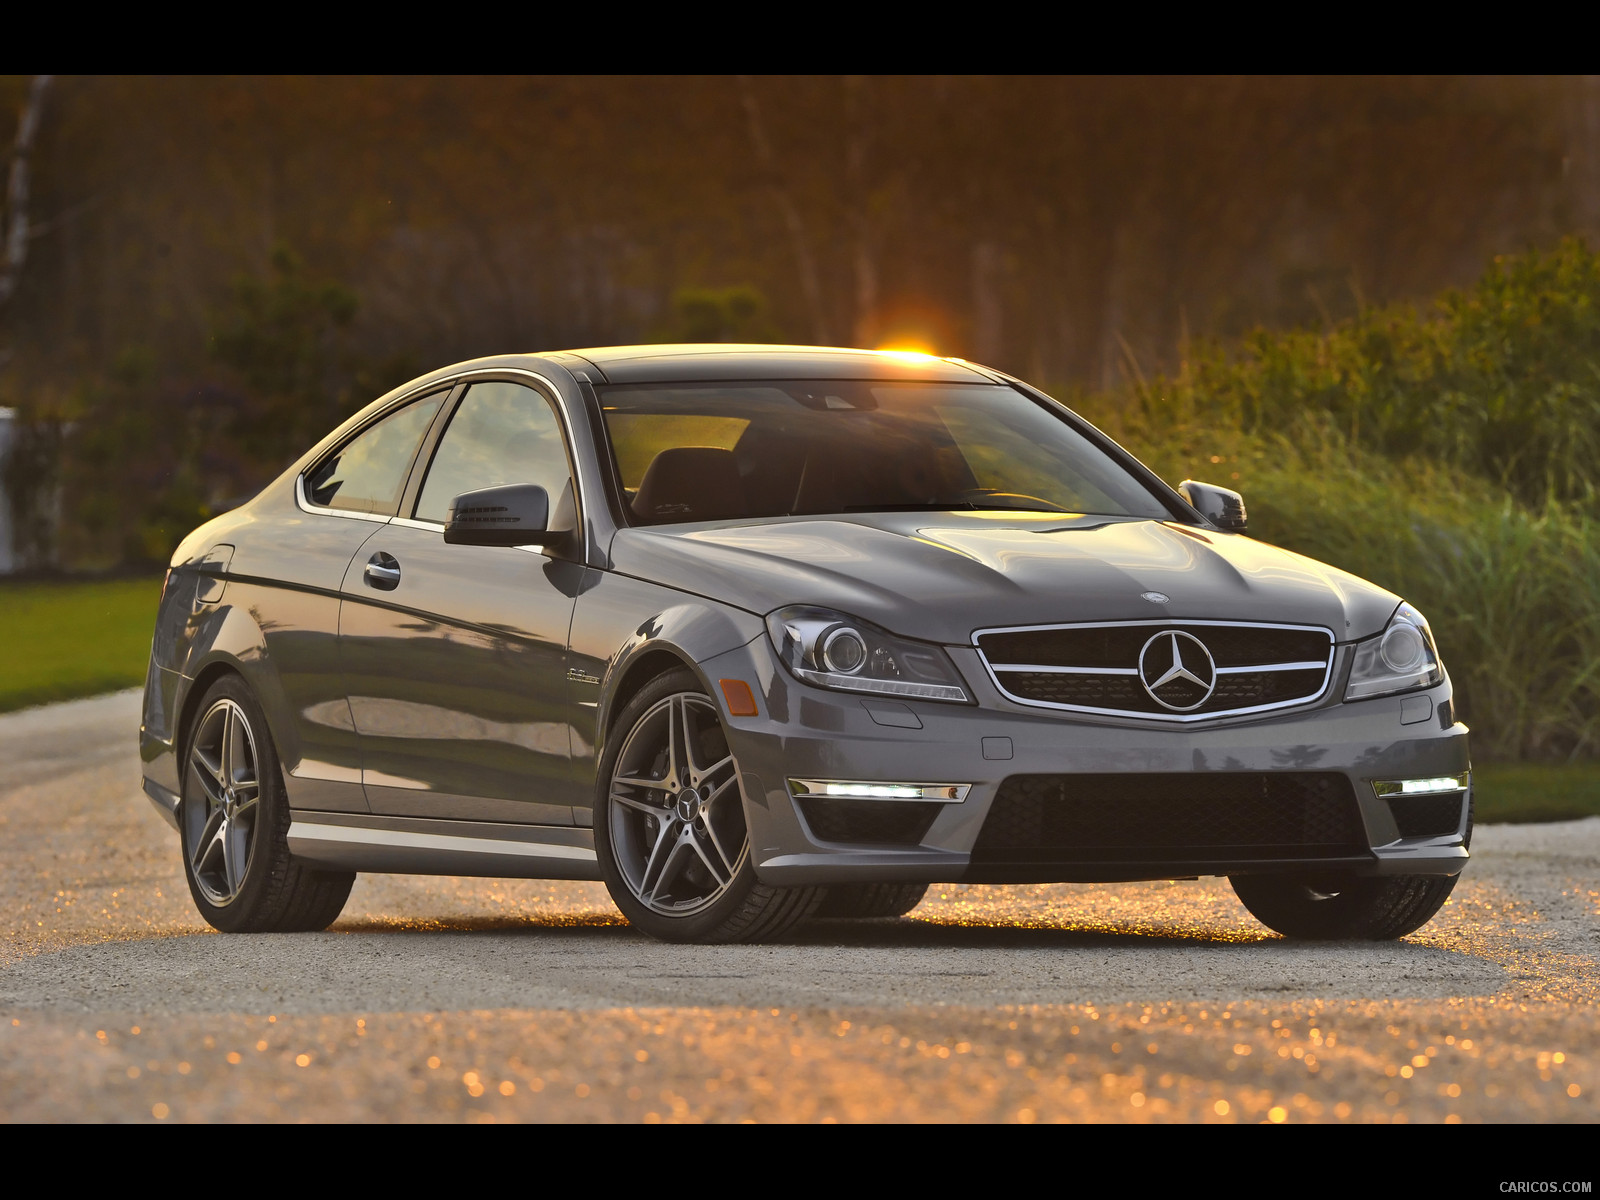 Mercedes-Benz C63 AMG Coupe (2012) with MCT transmission - , #7 of 64